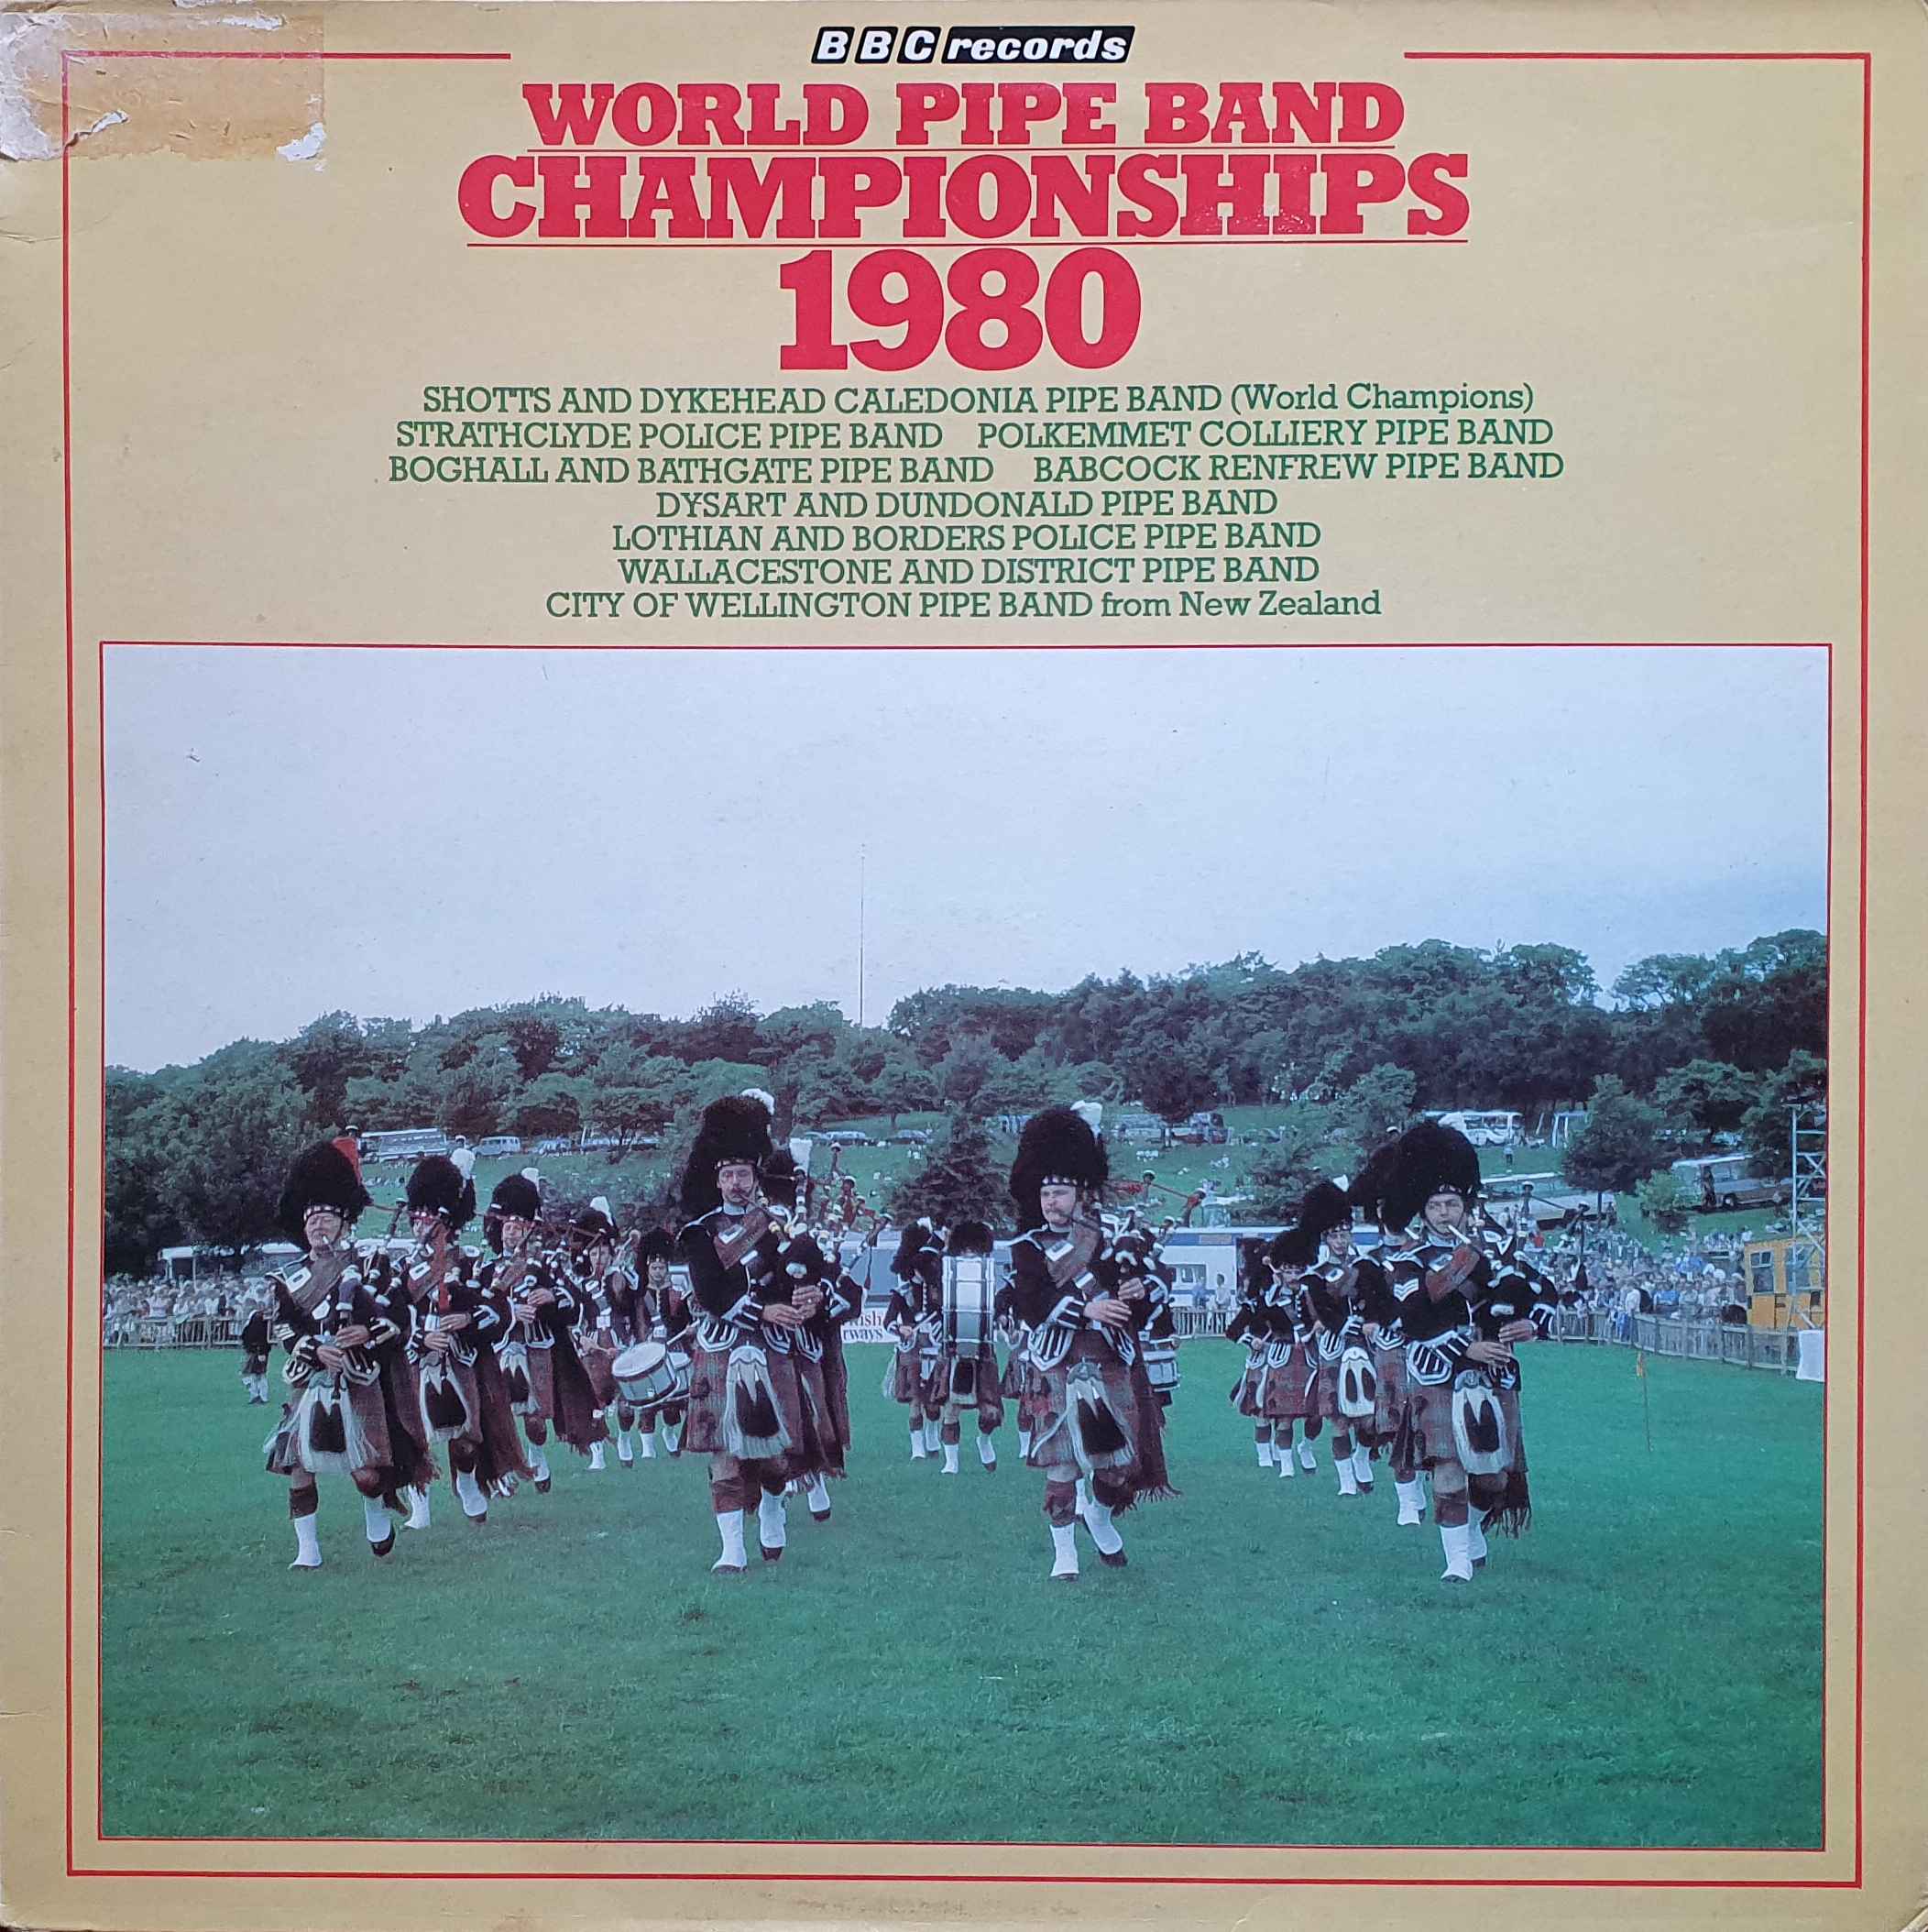 Picture of REC 401 World pipe band championships 1980 by artist Various from the BBC albums - Records and Tapes library